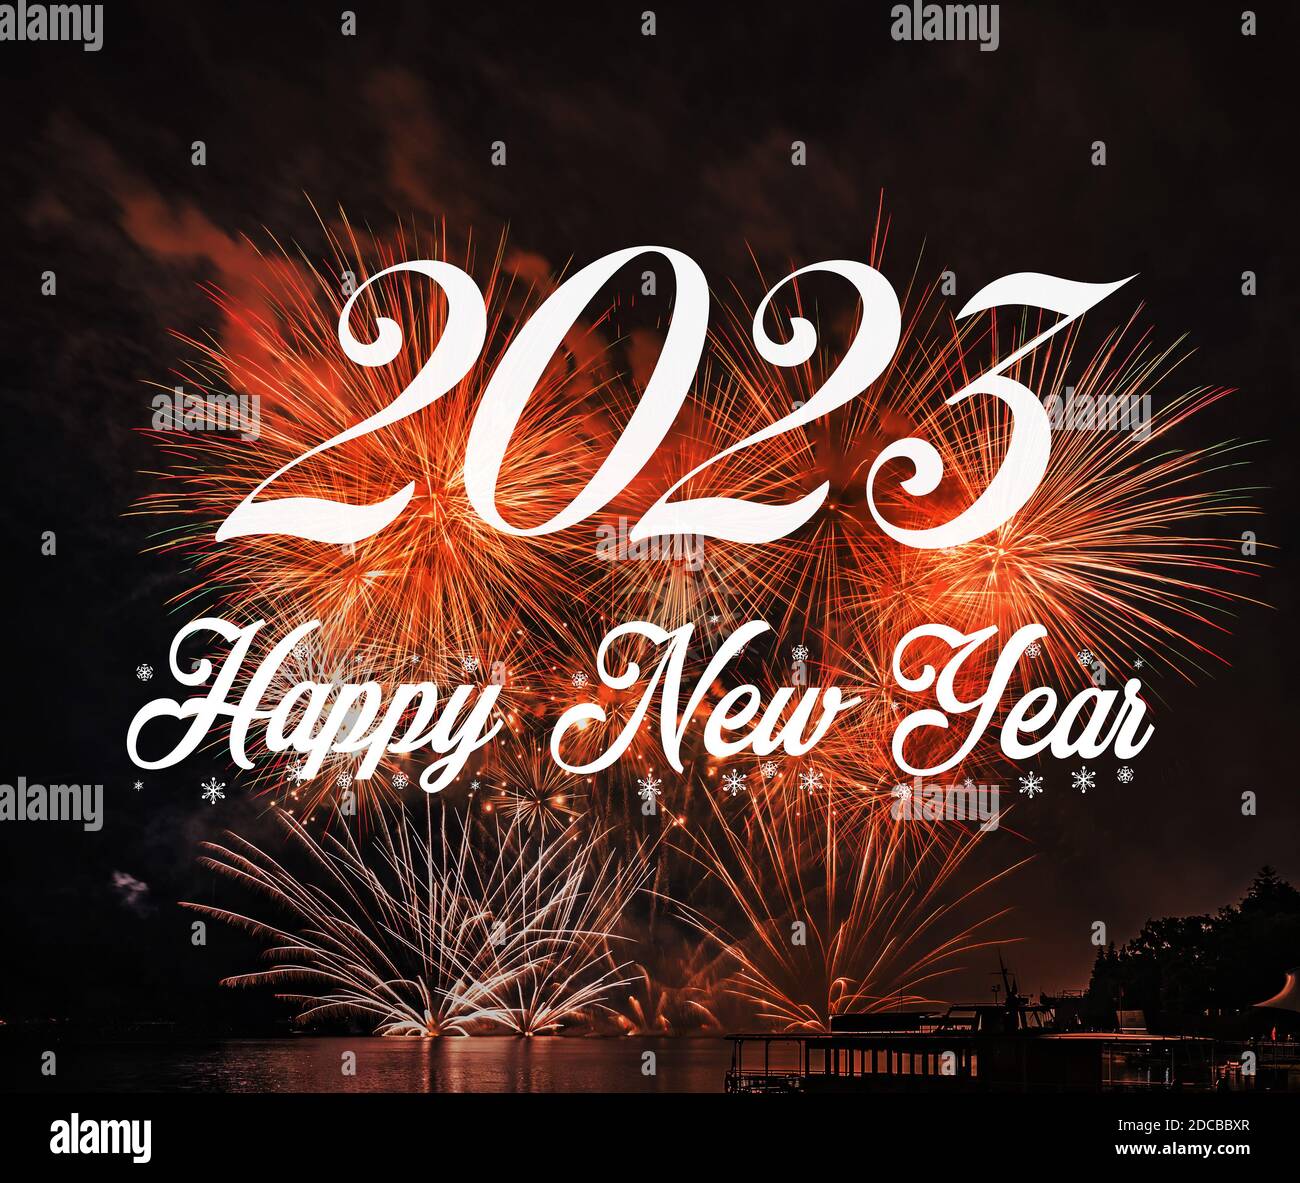 Happy new year 2023 with fireworks background. Celebration New Year